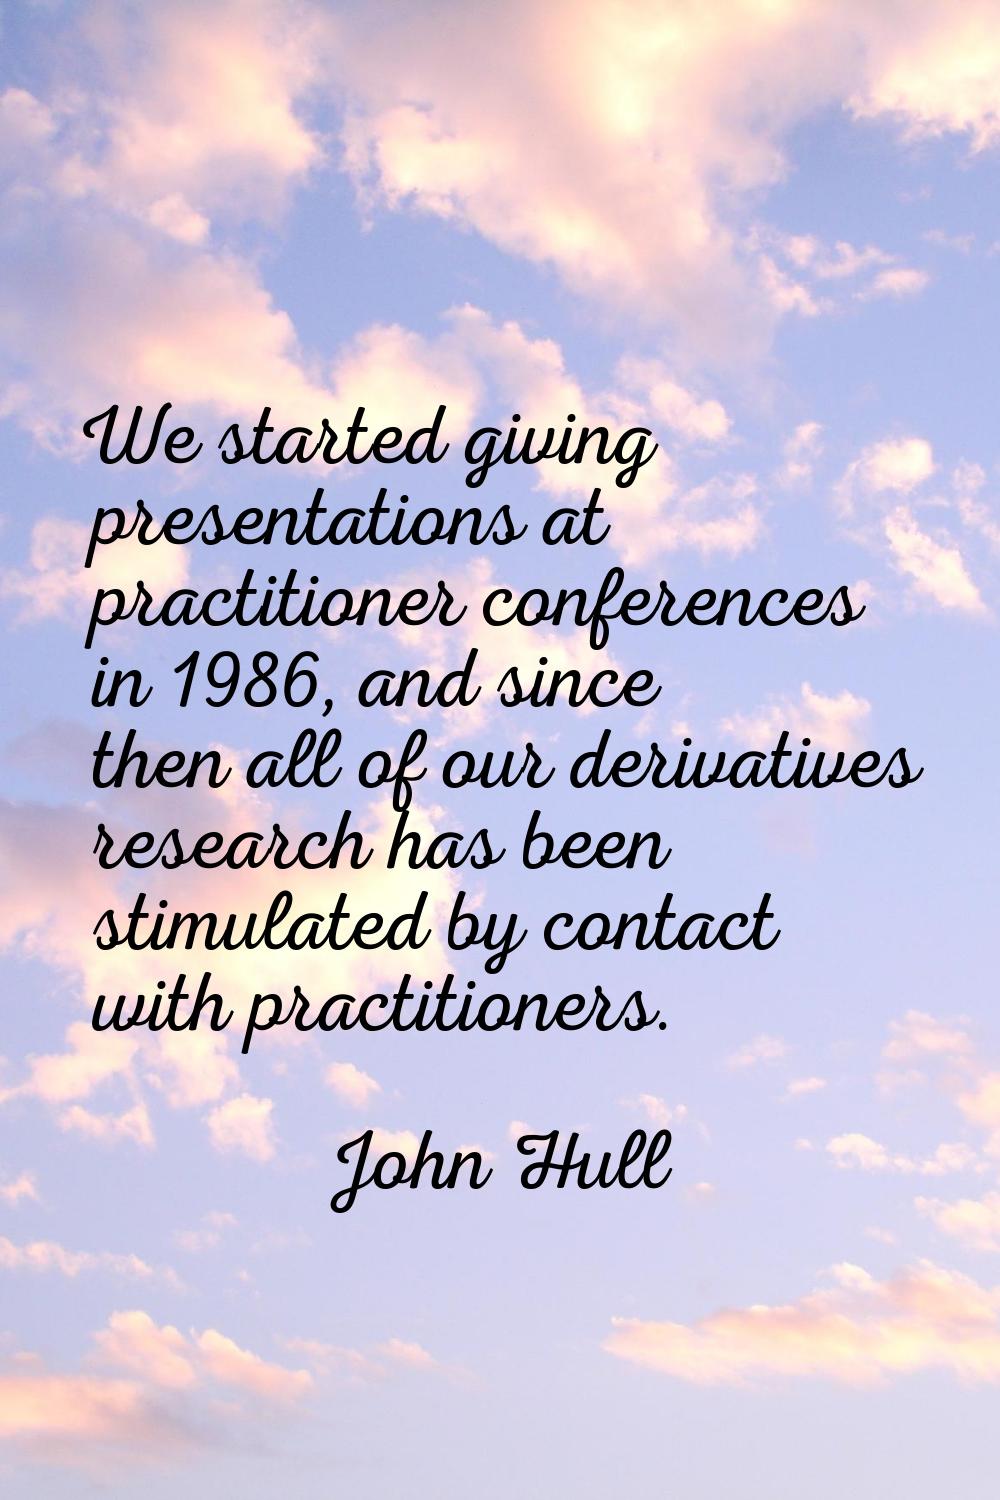 We started giving presentations at practitioner conferences in 1986, and since then all of our deri